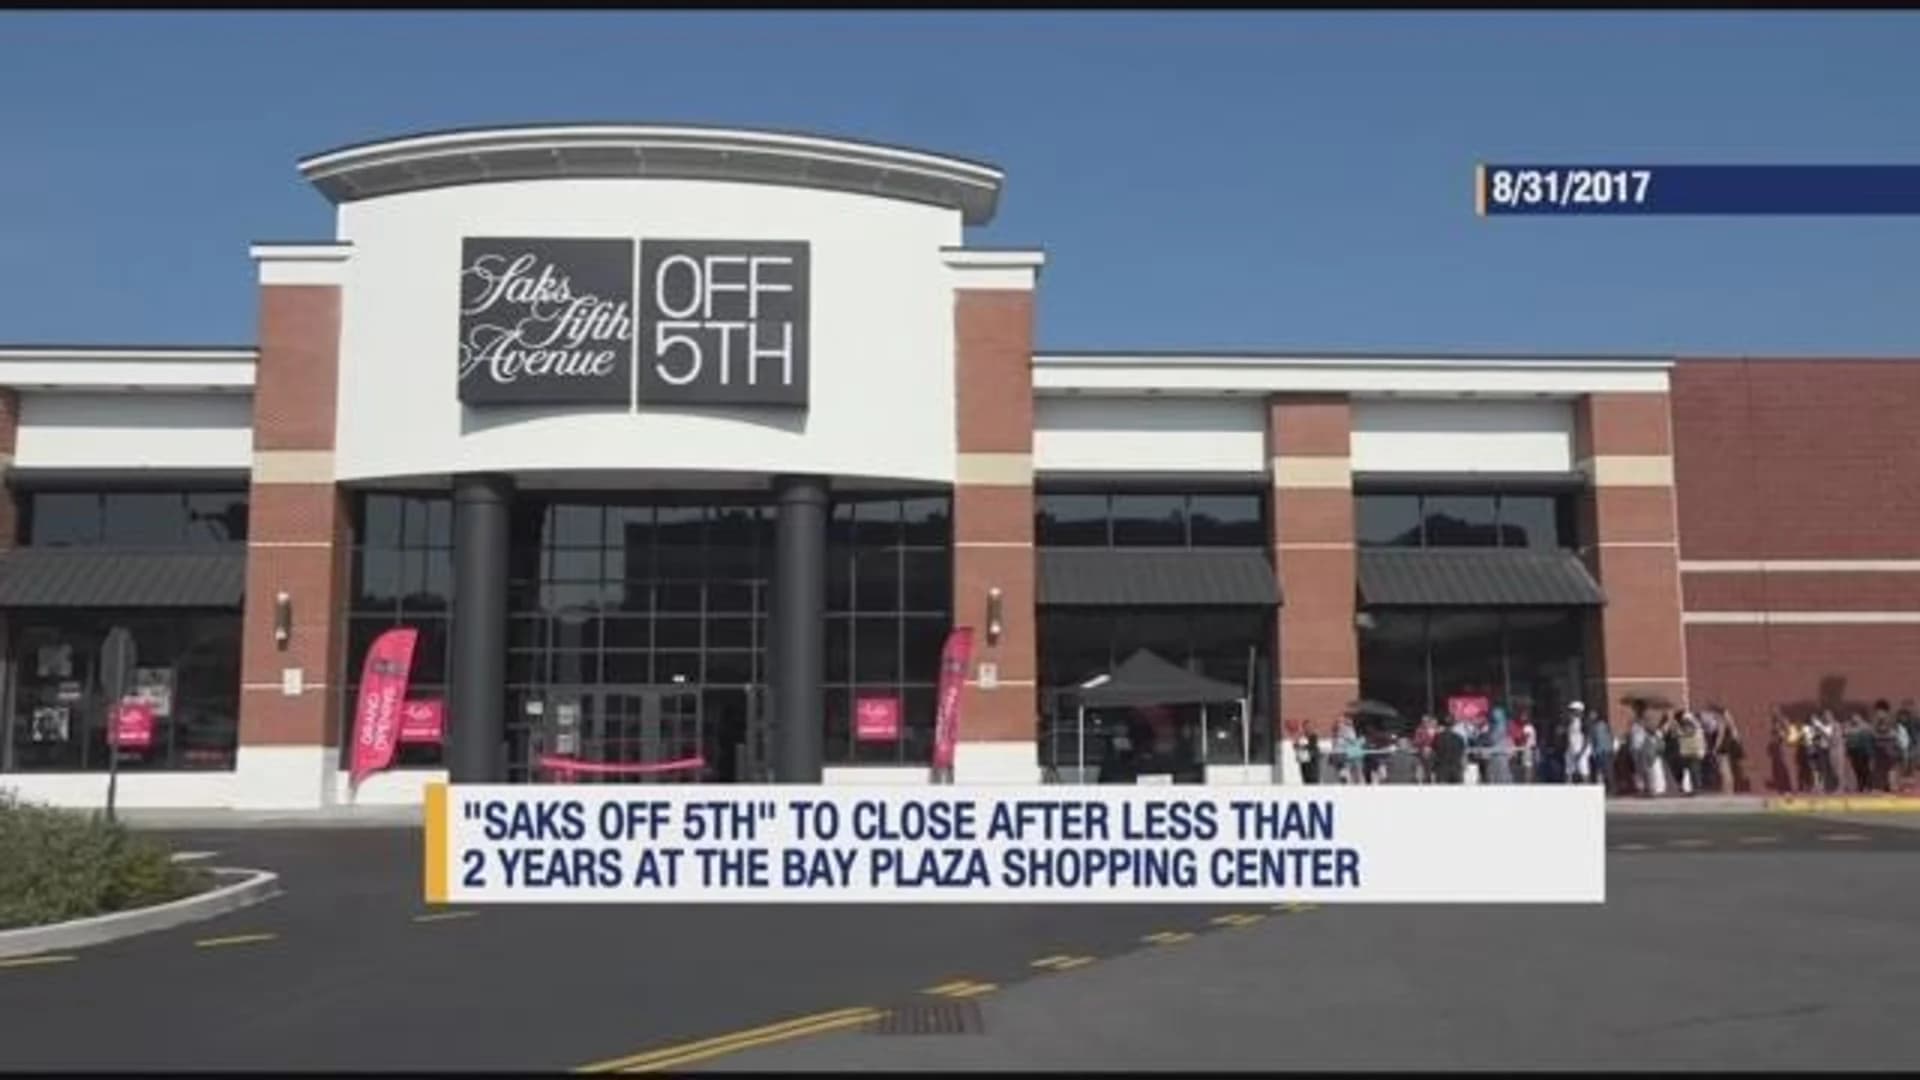 Saks Off 5th in Bay Plaza to close 2 years after grand opening